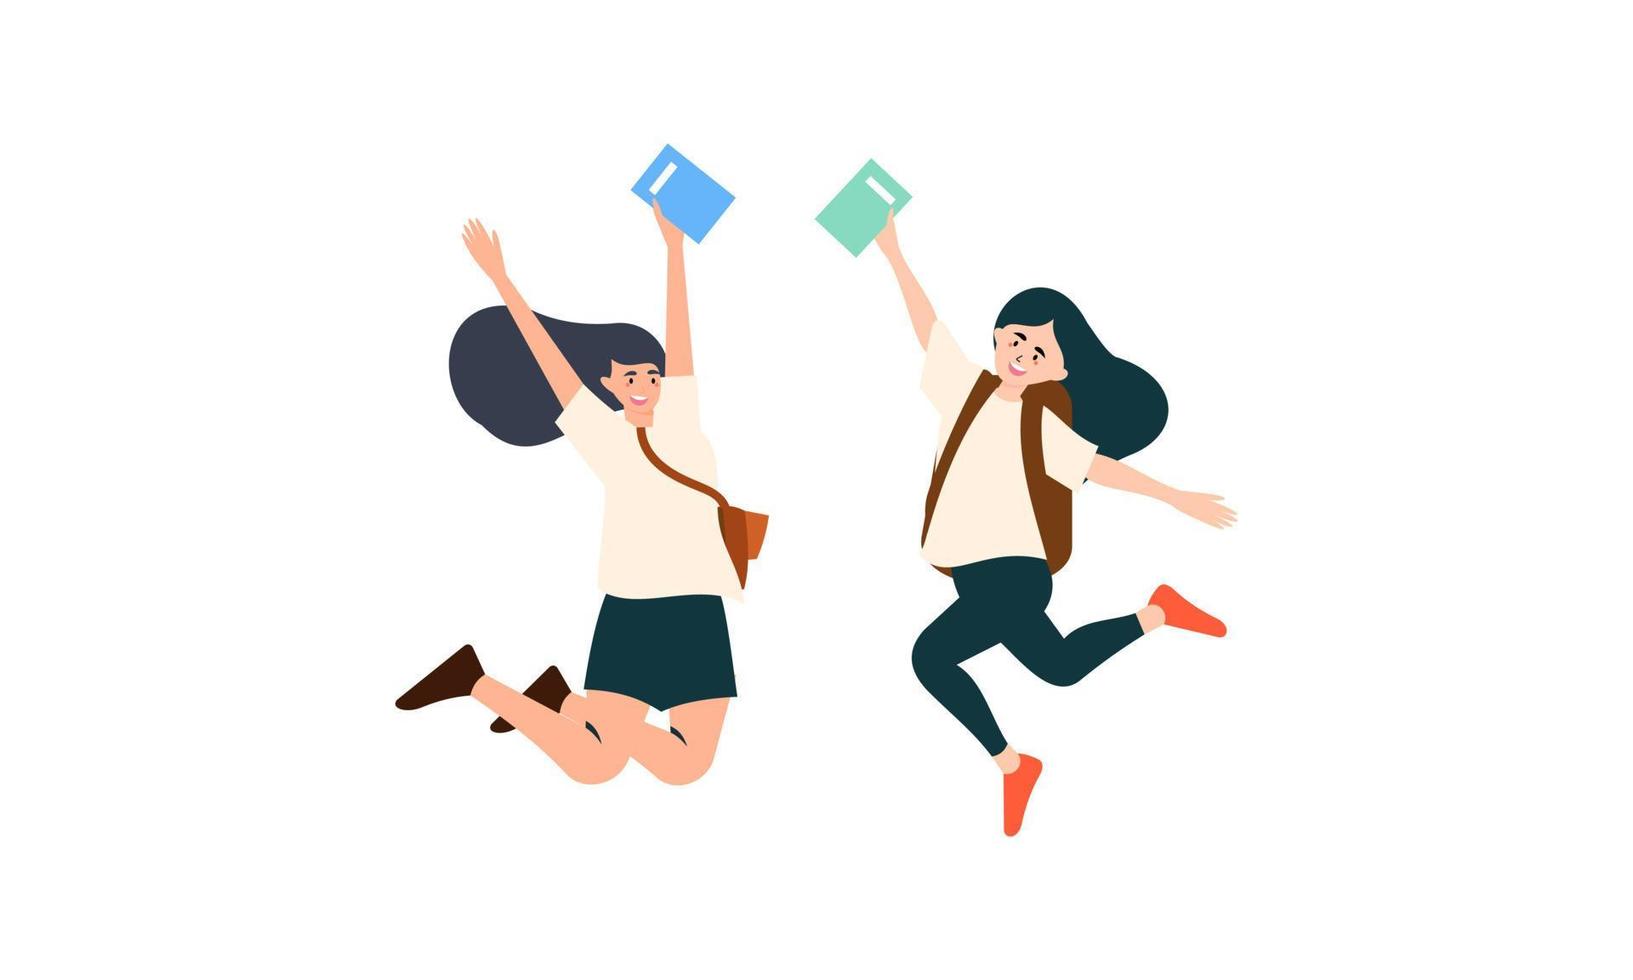 Happy students jumping illustration concept vector